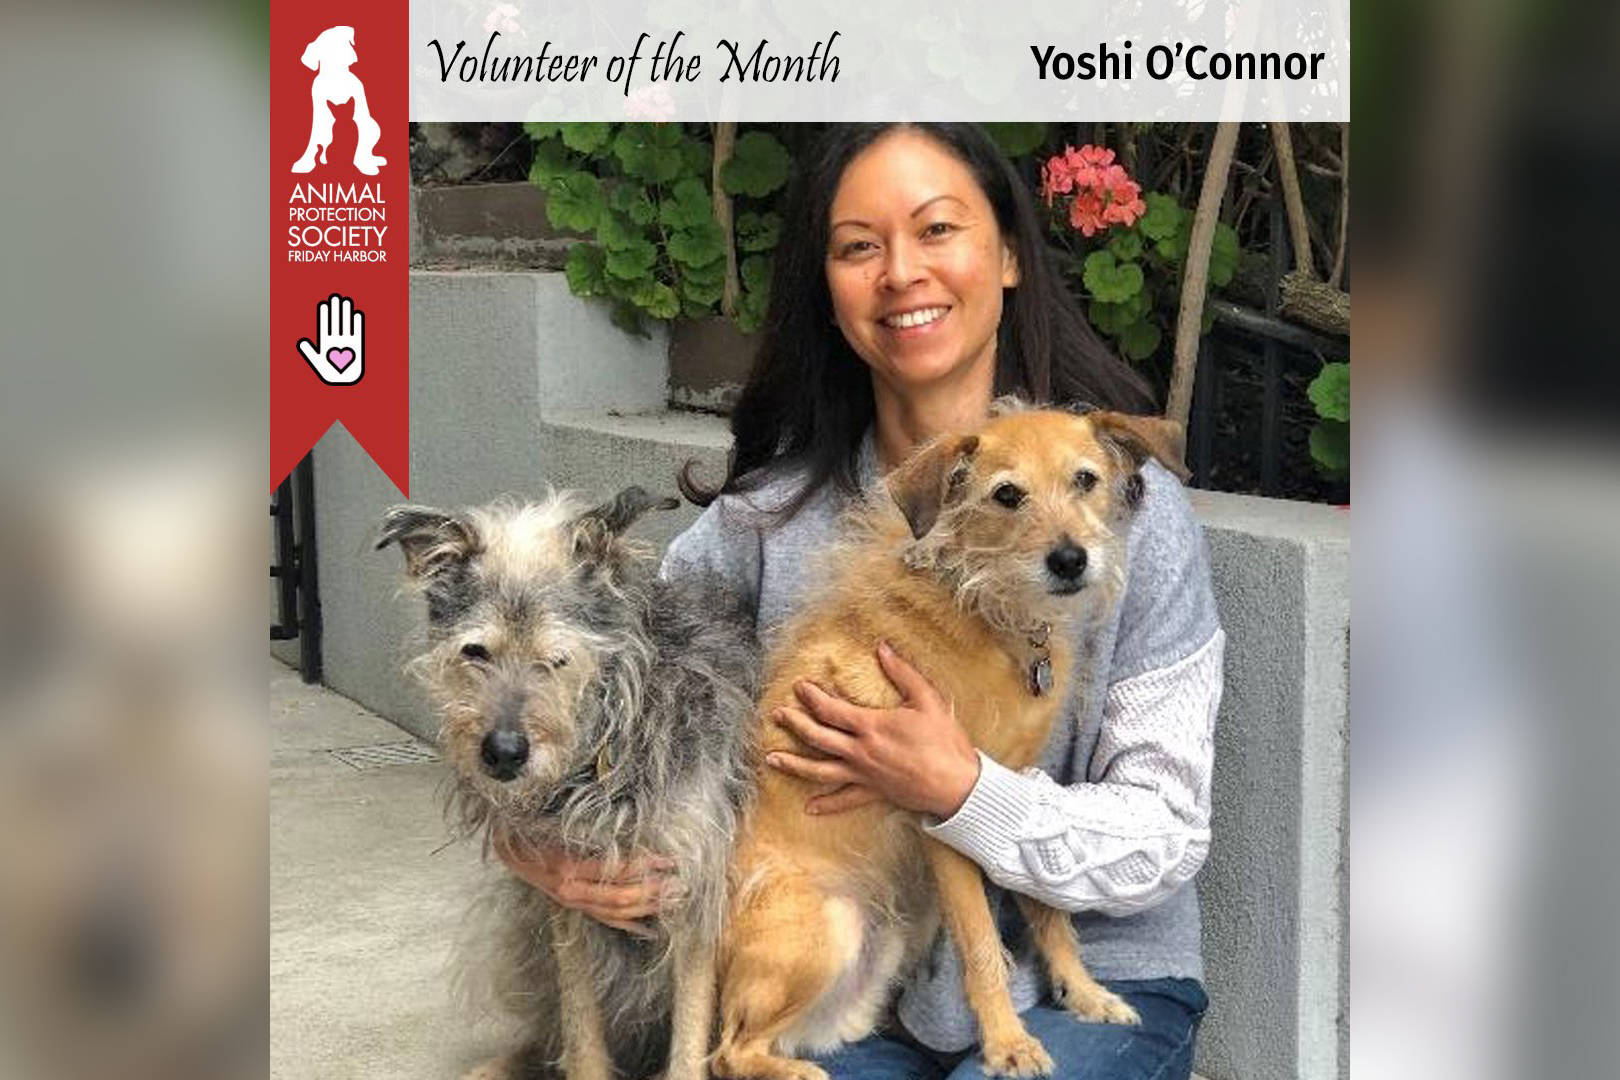 Yoshi with her rescue dogs, Schatzie and Grizzly.